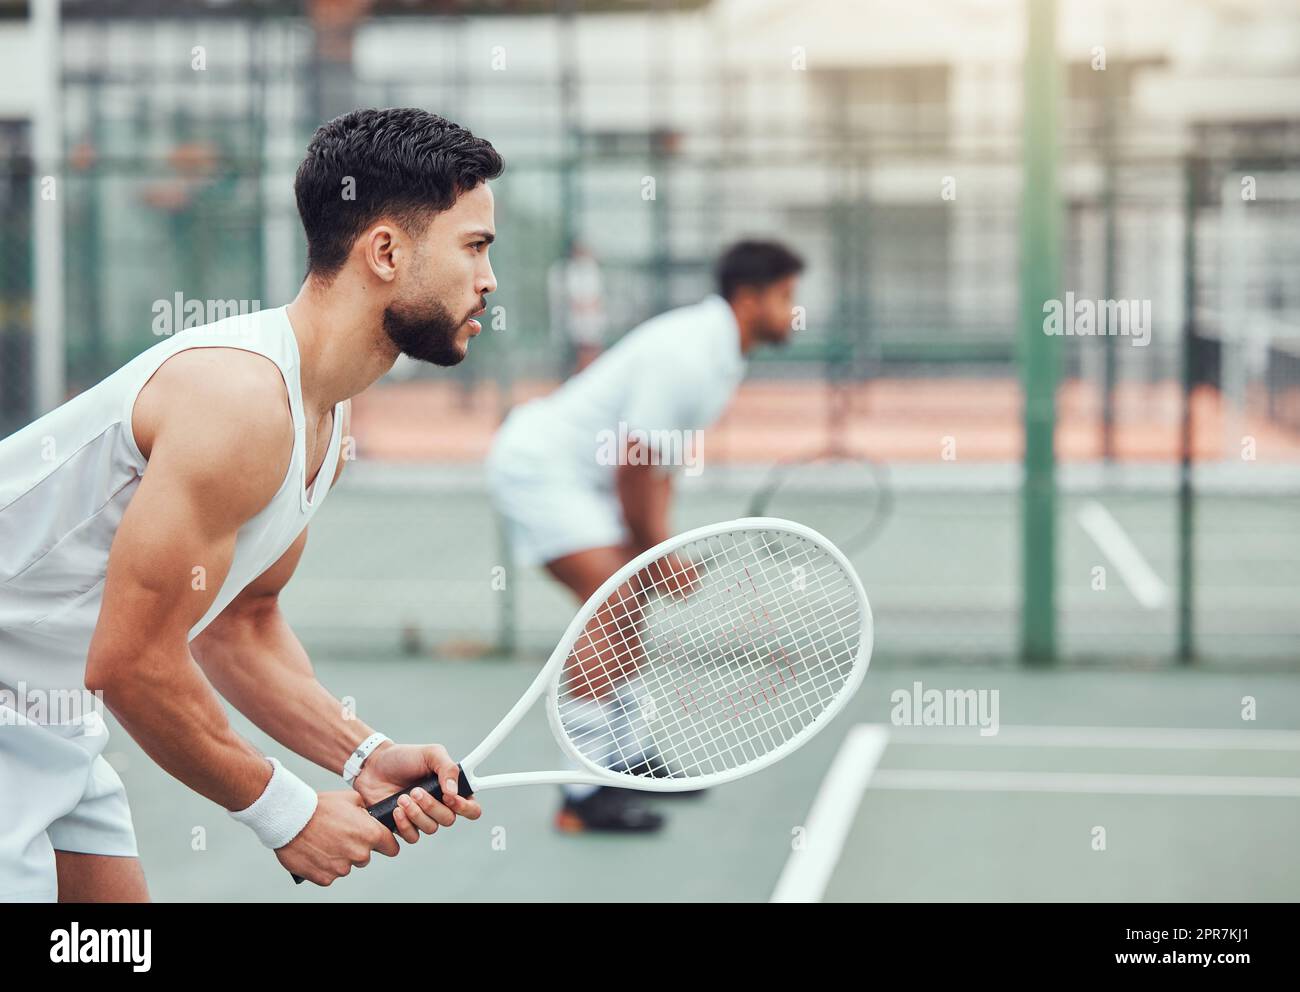 Two ethnic tennis players holding rackets and ready to play court game. Serious, focused athletes together in stance. Playing competitive doubles match as team to stay fit and healthy in sports club Stock Photo